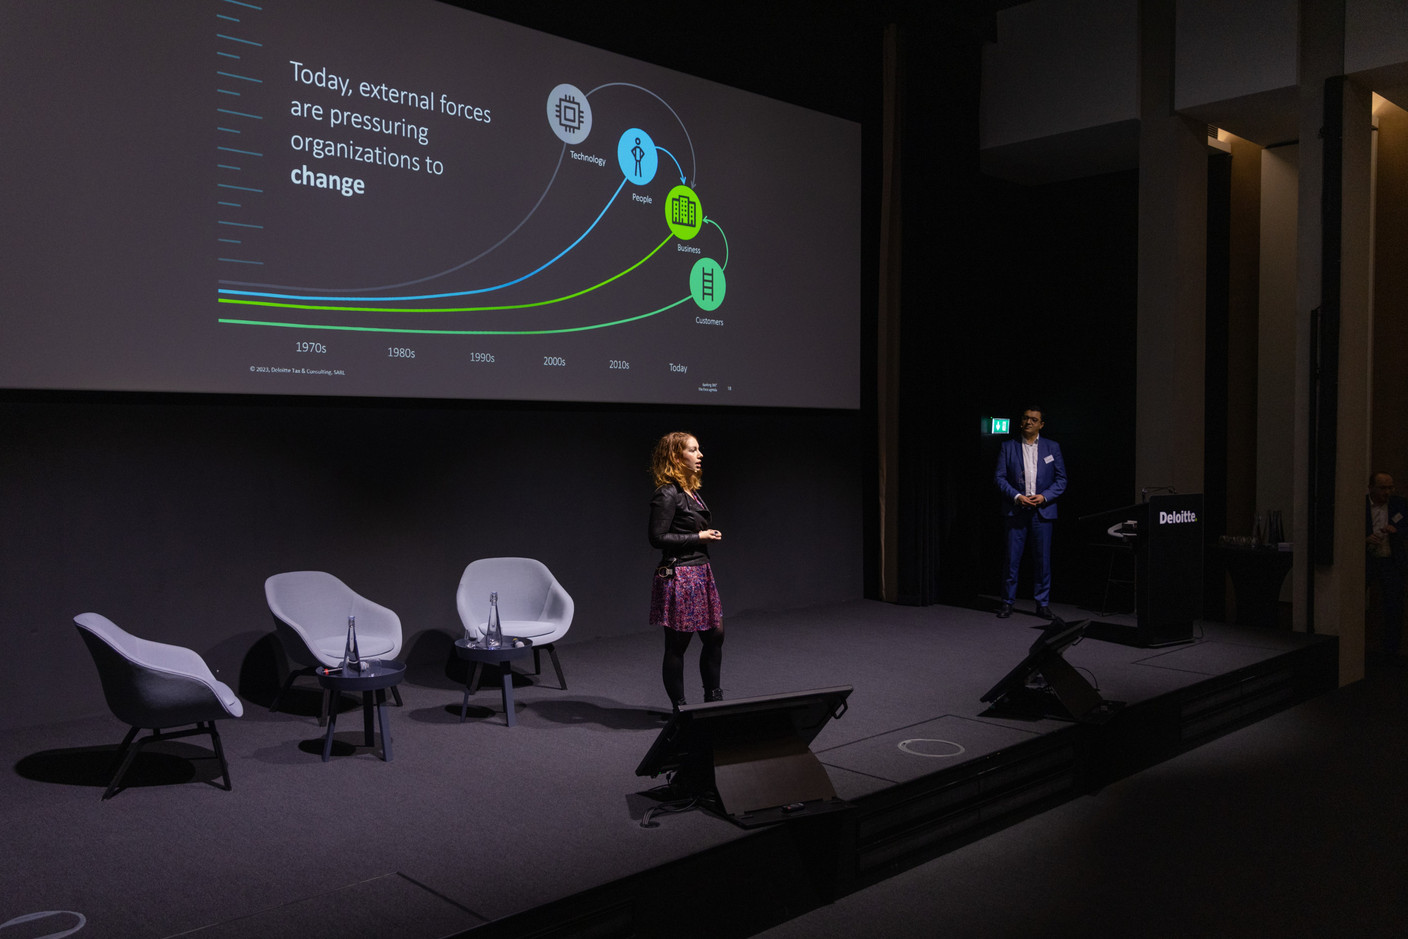 Marie Cecile Legrand, manager, and Abderrahmane Saber, director, spoke about running businesses efficiently at Deloitte Luxembourg's Banking 360 conference on 24 January 2023. Romain Gamba/Maison Moderne